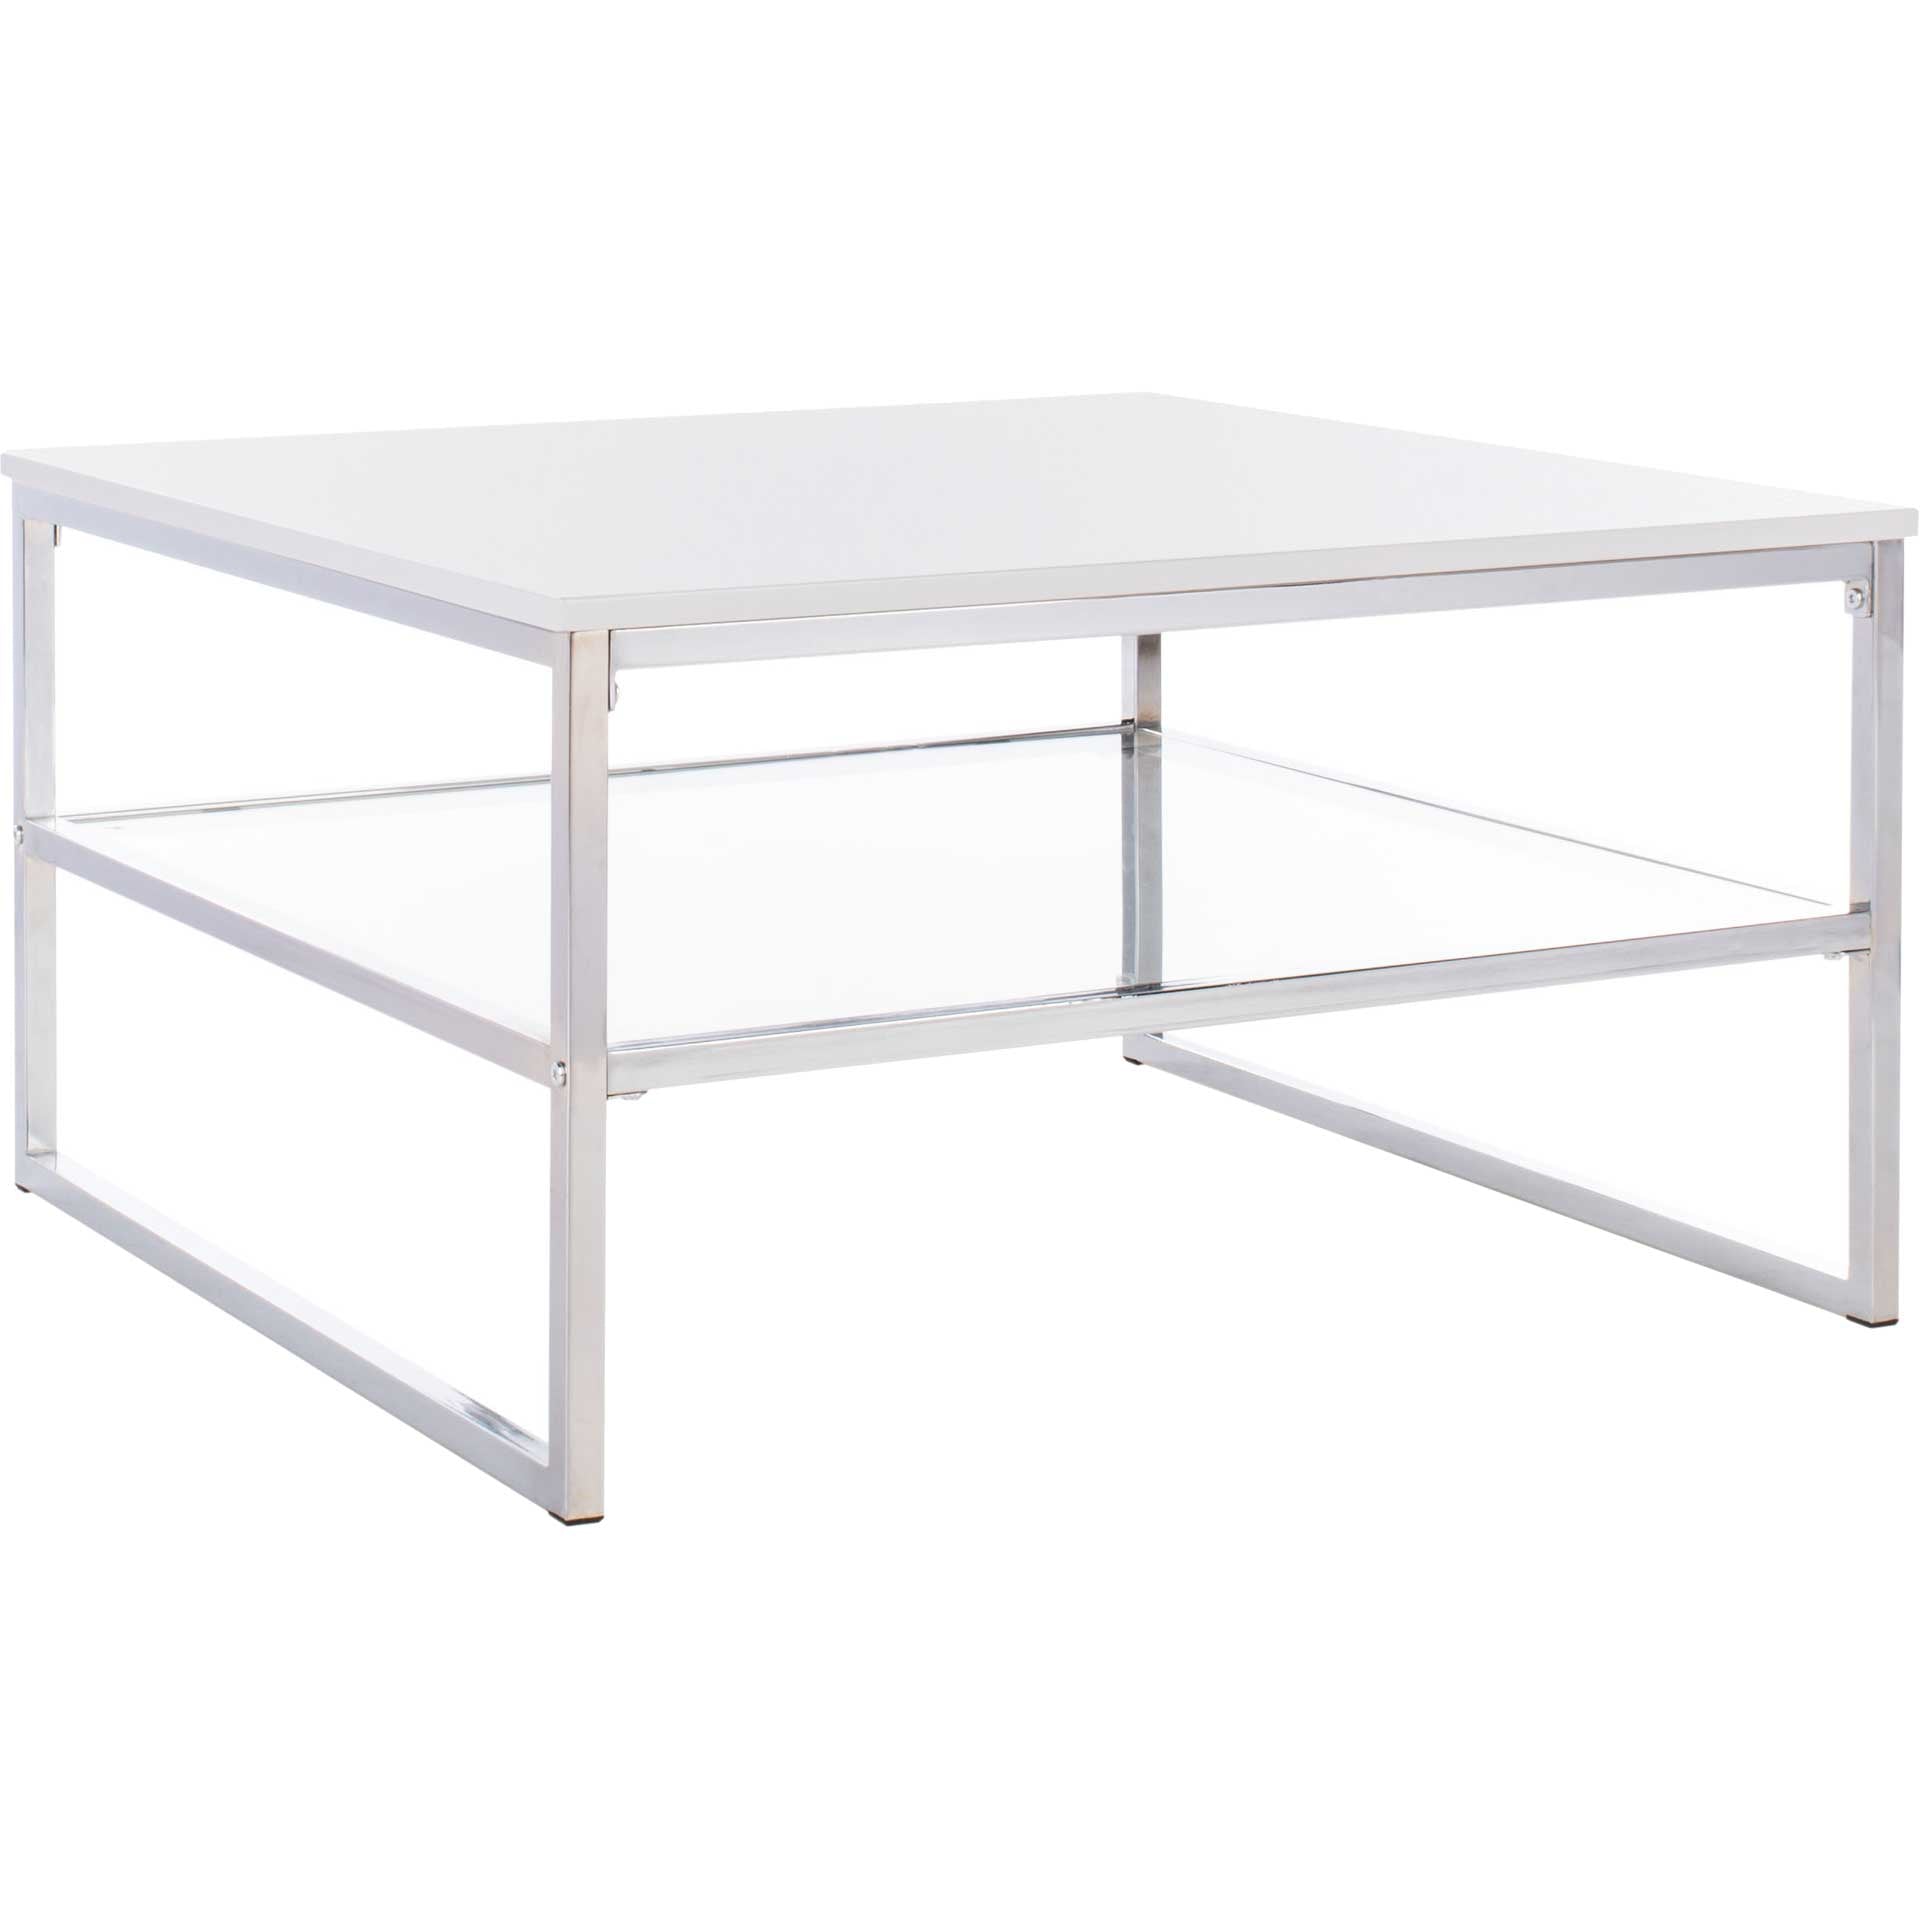 Raul 2 Tier Square Coffee Table White